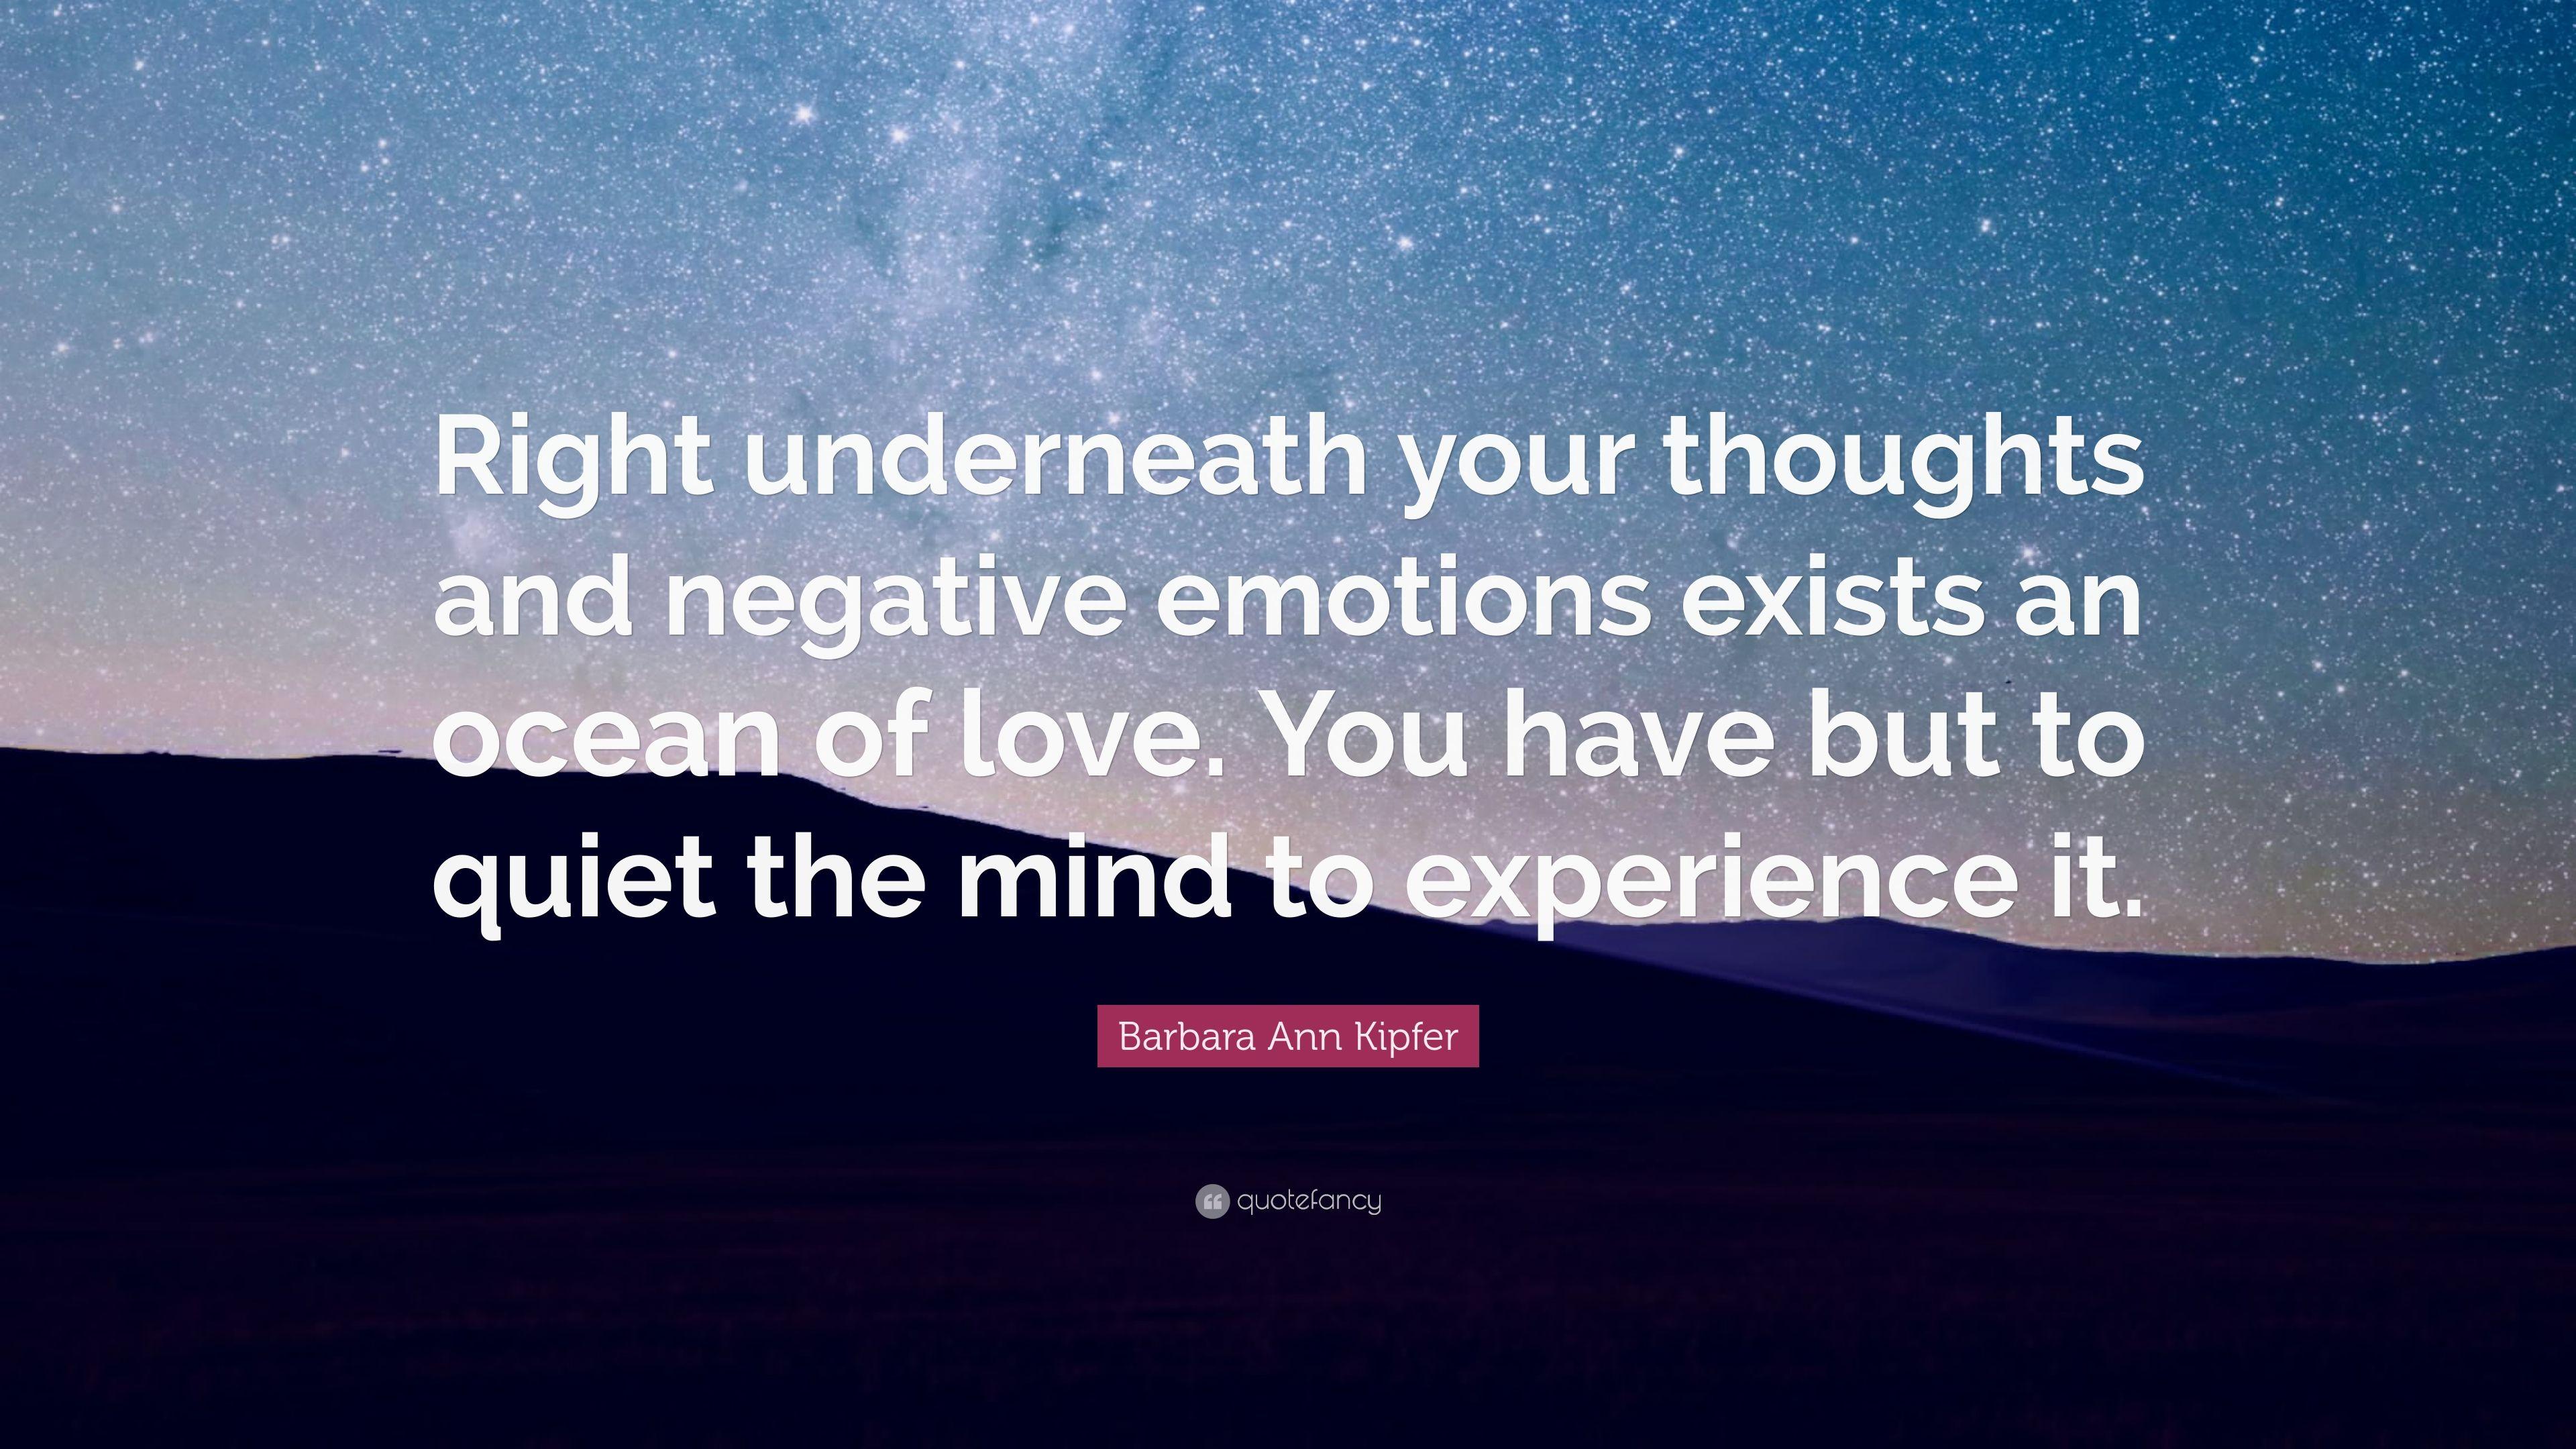 Barbara Ann Kipfer Quote: “Right underneath your thoughts